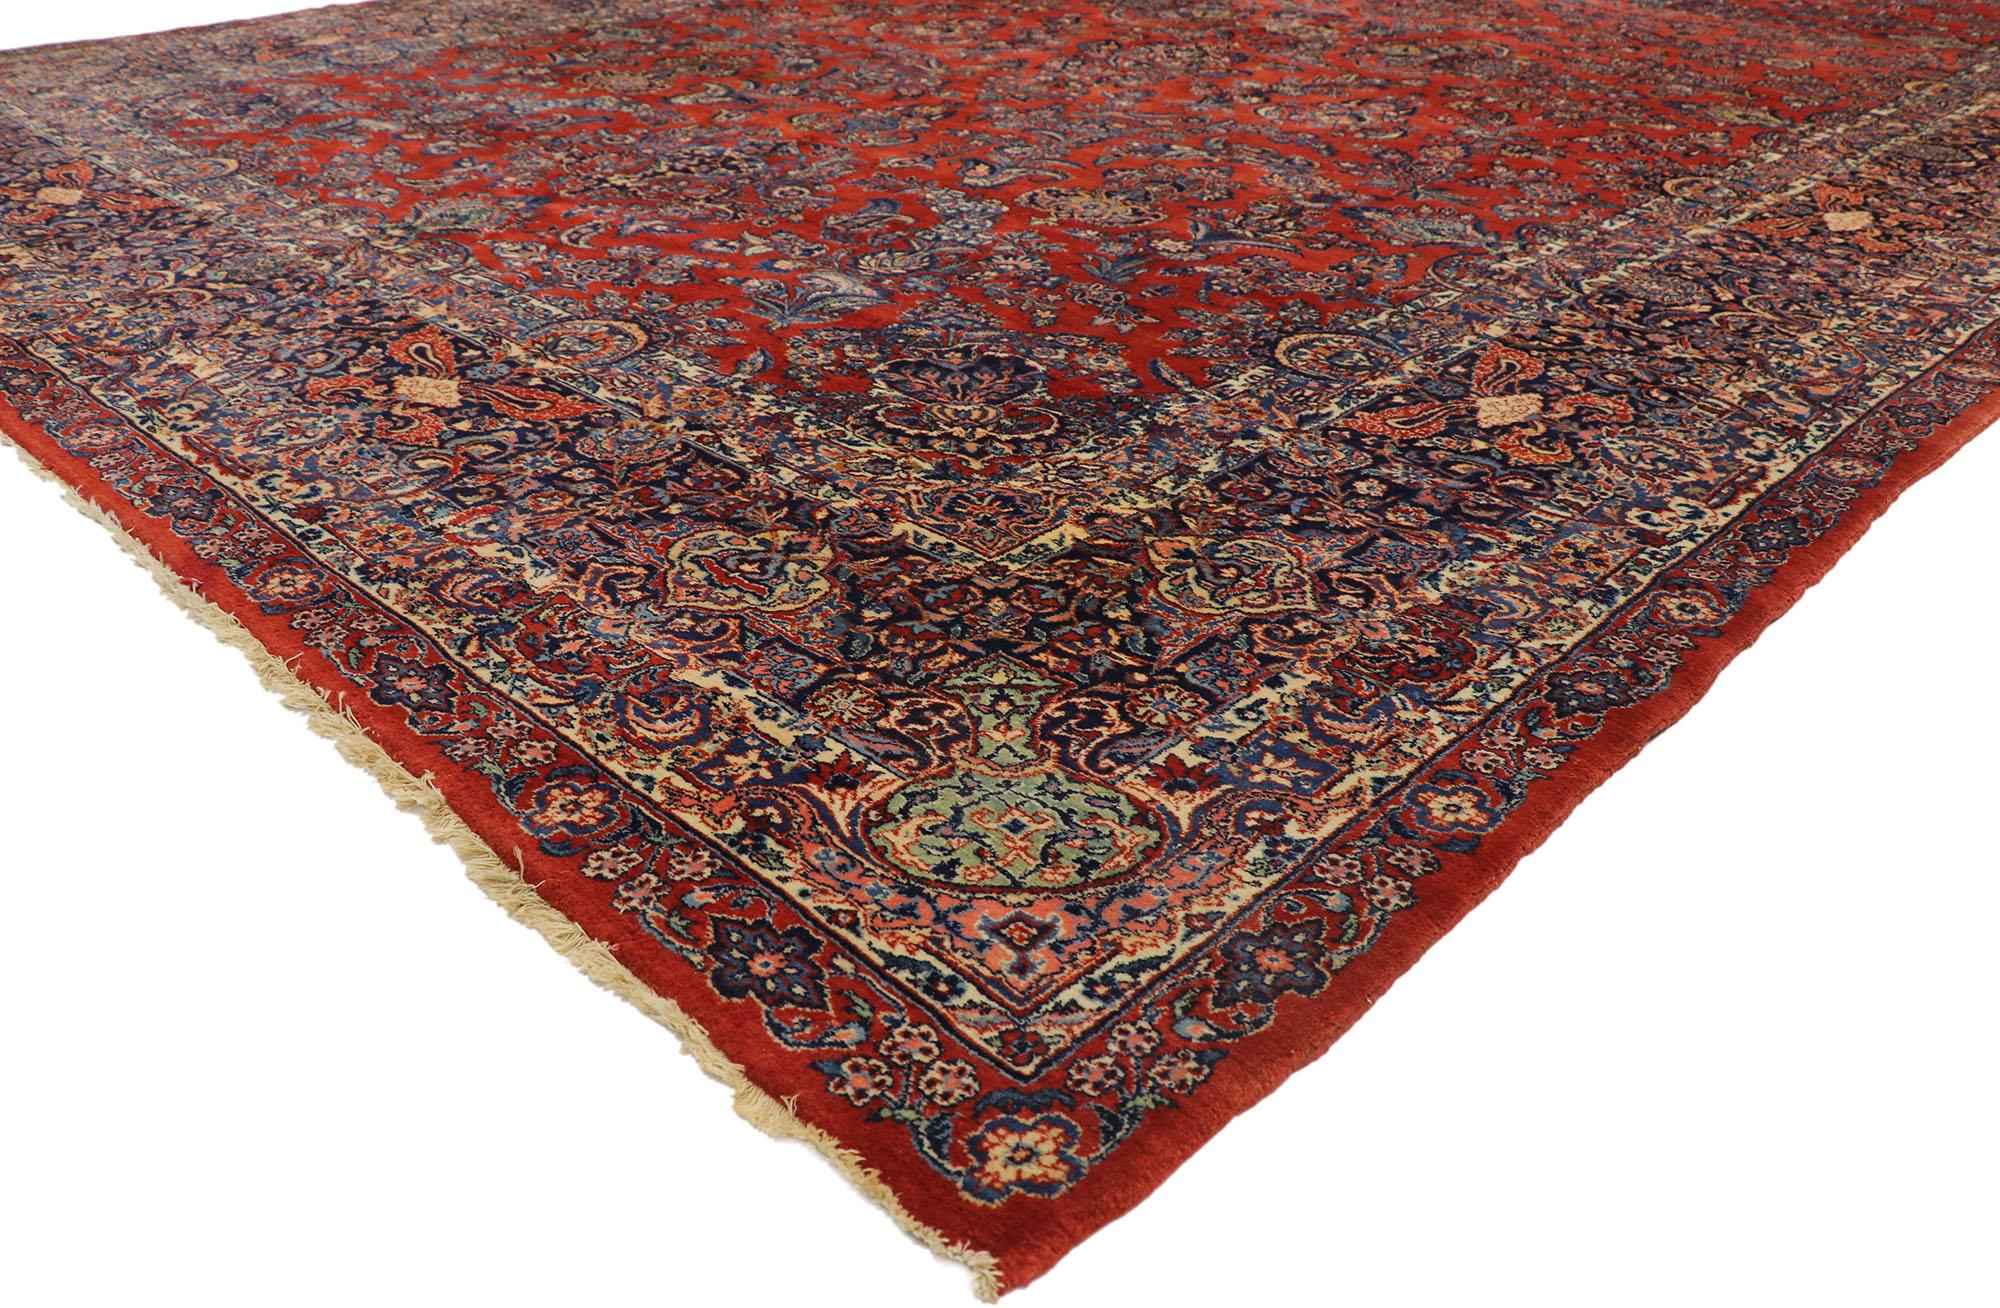 77432 late 19th century antique Persian Qazvin Palace rug with English Tudor style. With timeless appeal, refined colors, and architectural design elements, this hand knotted wool antique Persian Qazvin palace rug can beautifully blend contemporary